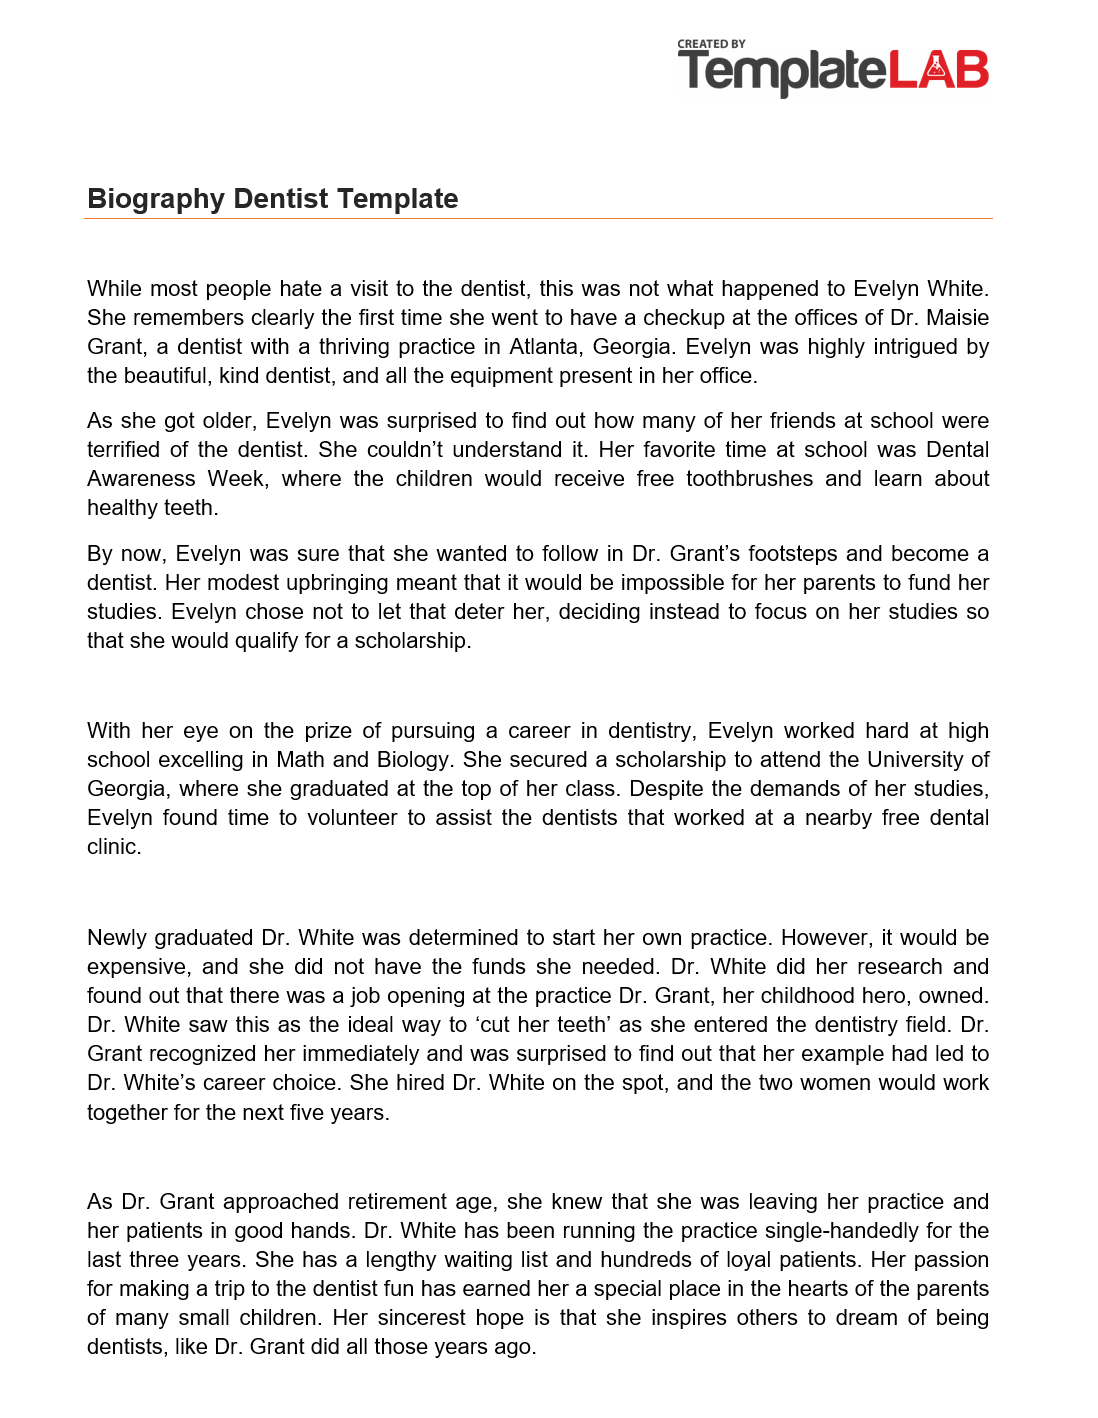 Free Dentist Biography Template